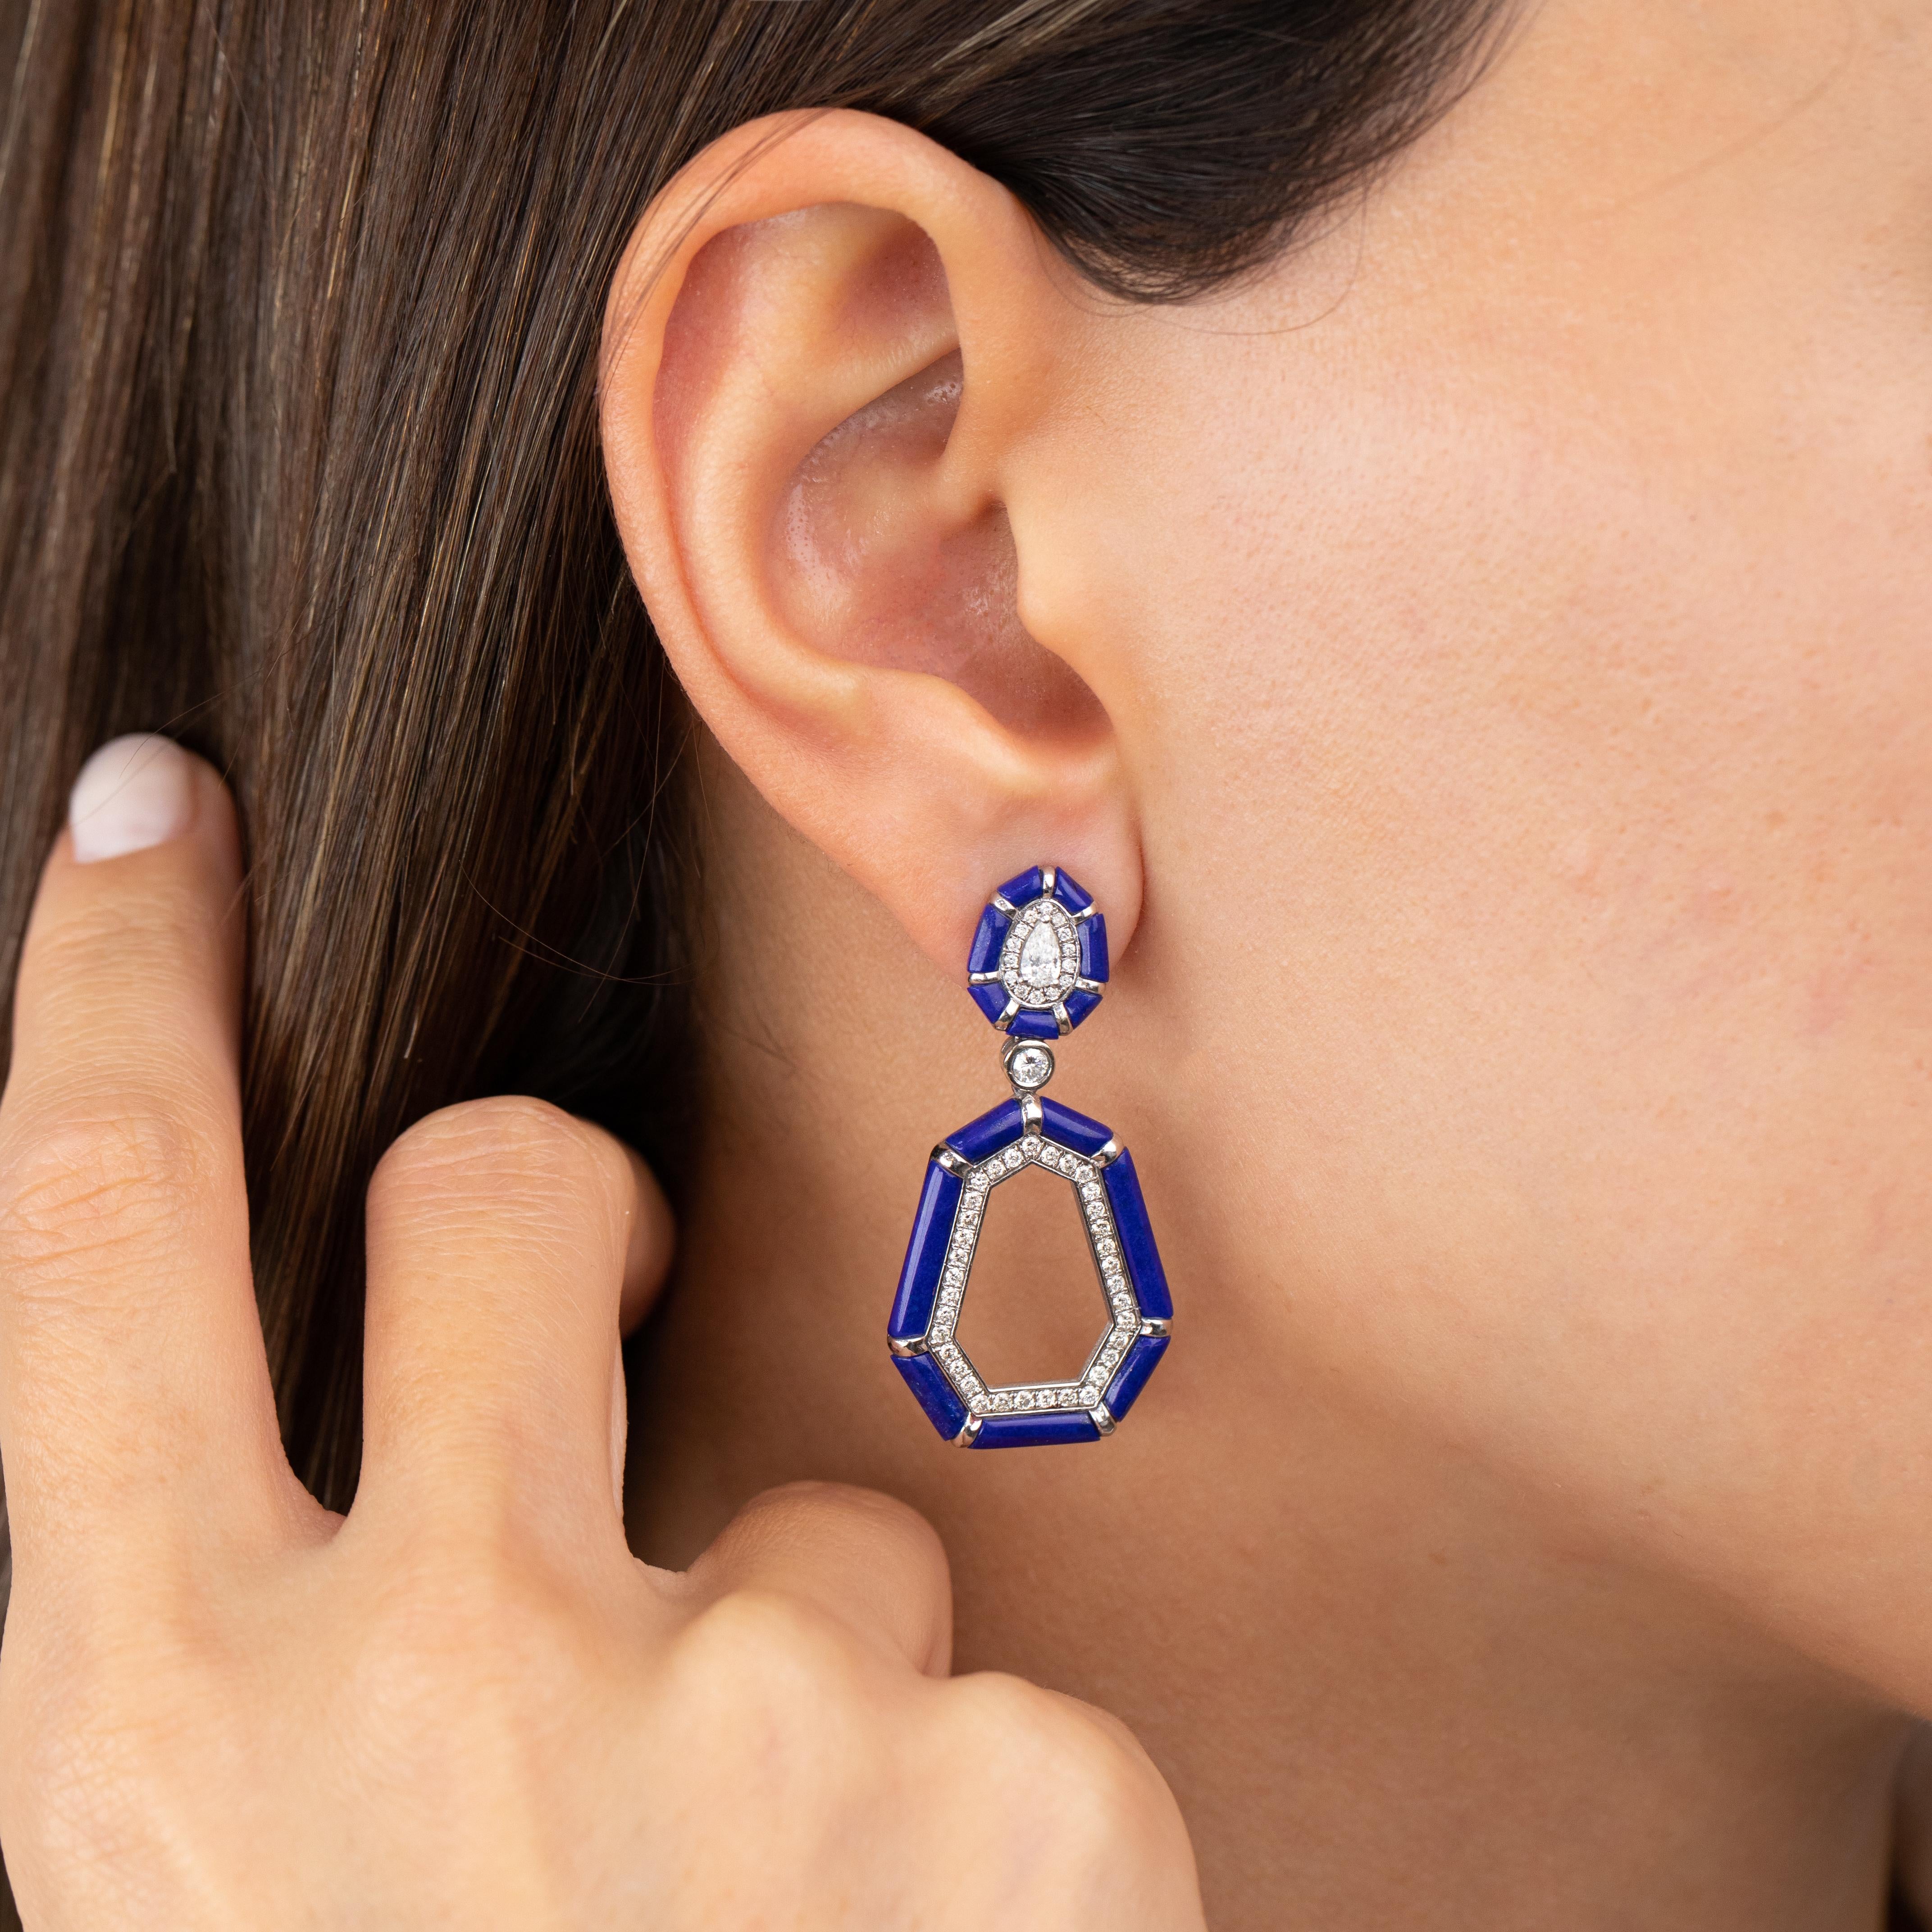 14K Gold Hanging Earrings with Diamond and Lapis Natural Stone Earrings

This earrings was made with quality materials and excellent handwork. I guarantee the quality assurance of my handwork and materials. It is vital for me that you are totally